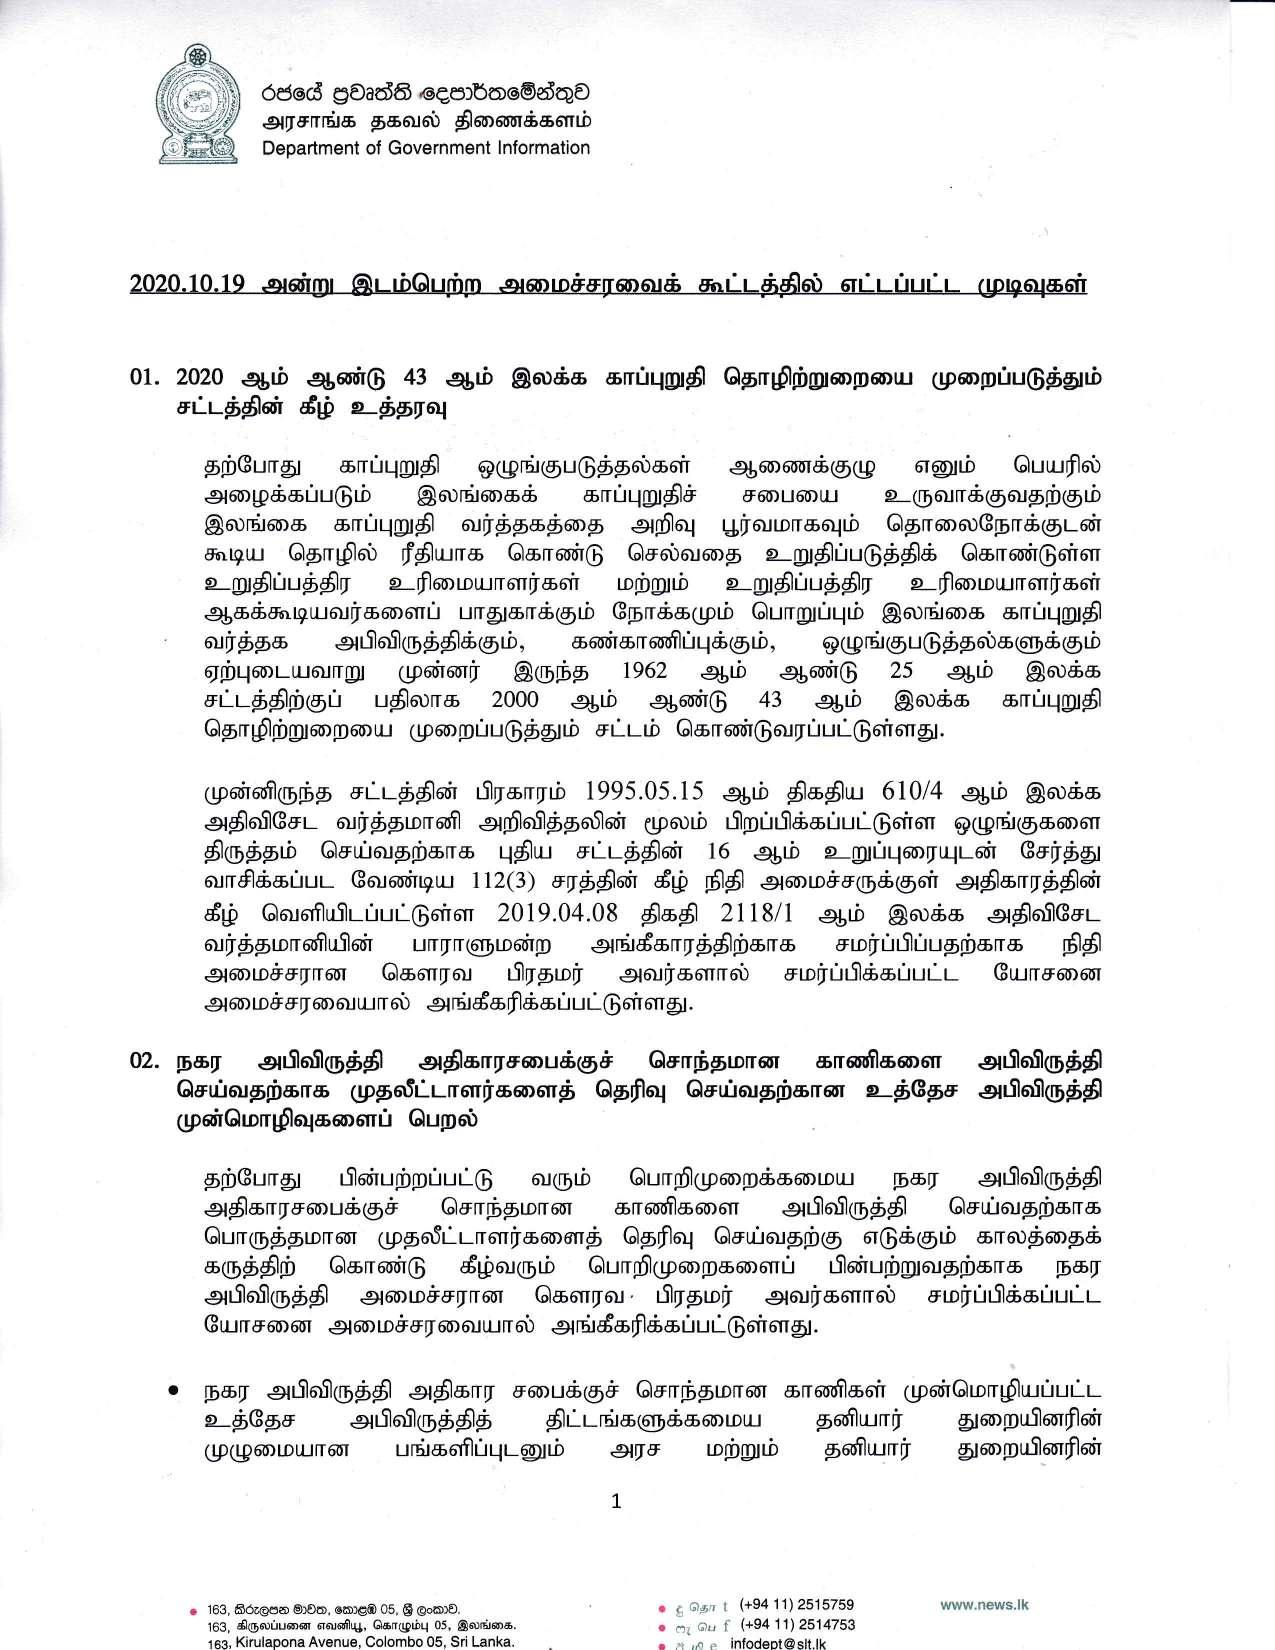 Cabinet Decision on 19.10.2020 Tamil compressed page 001